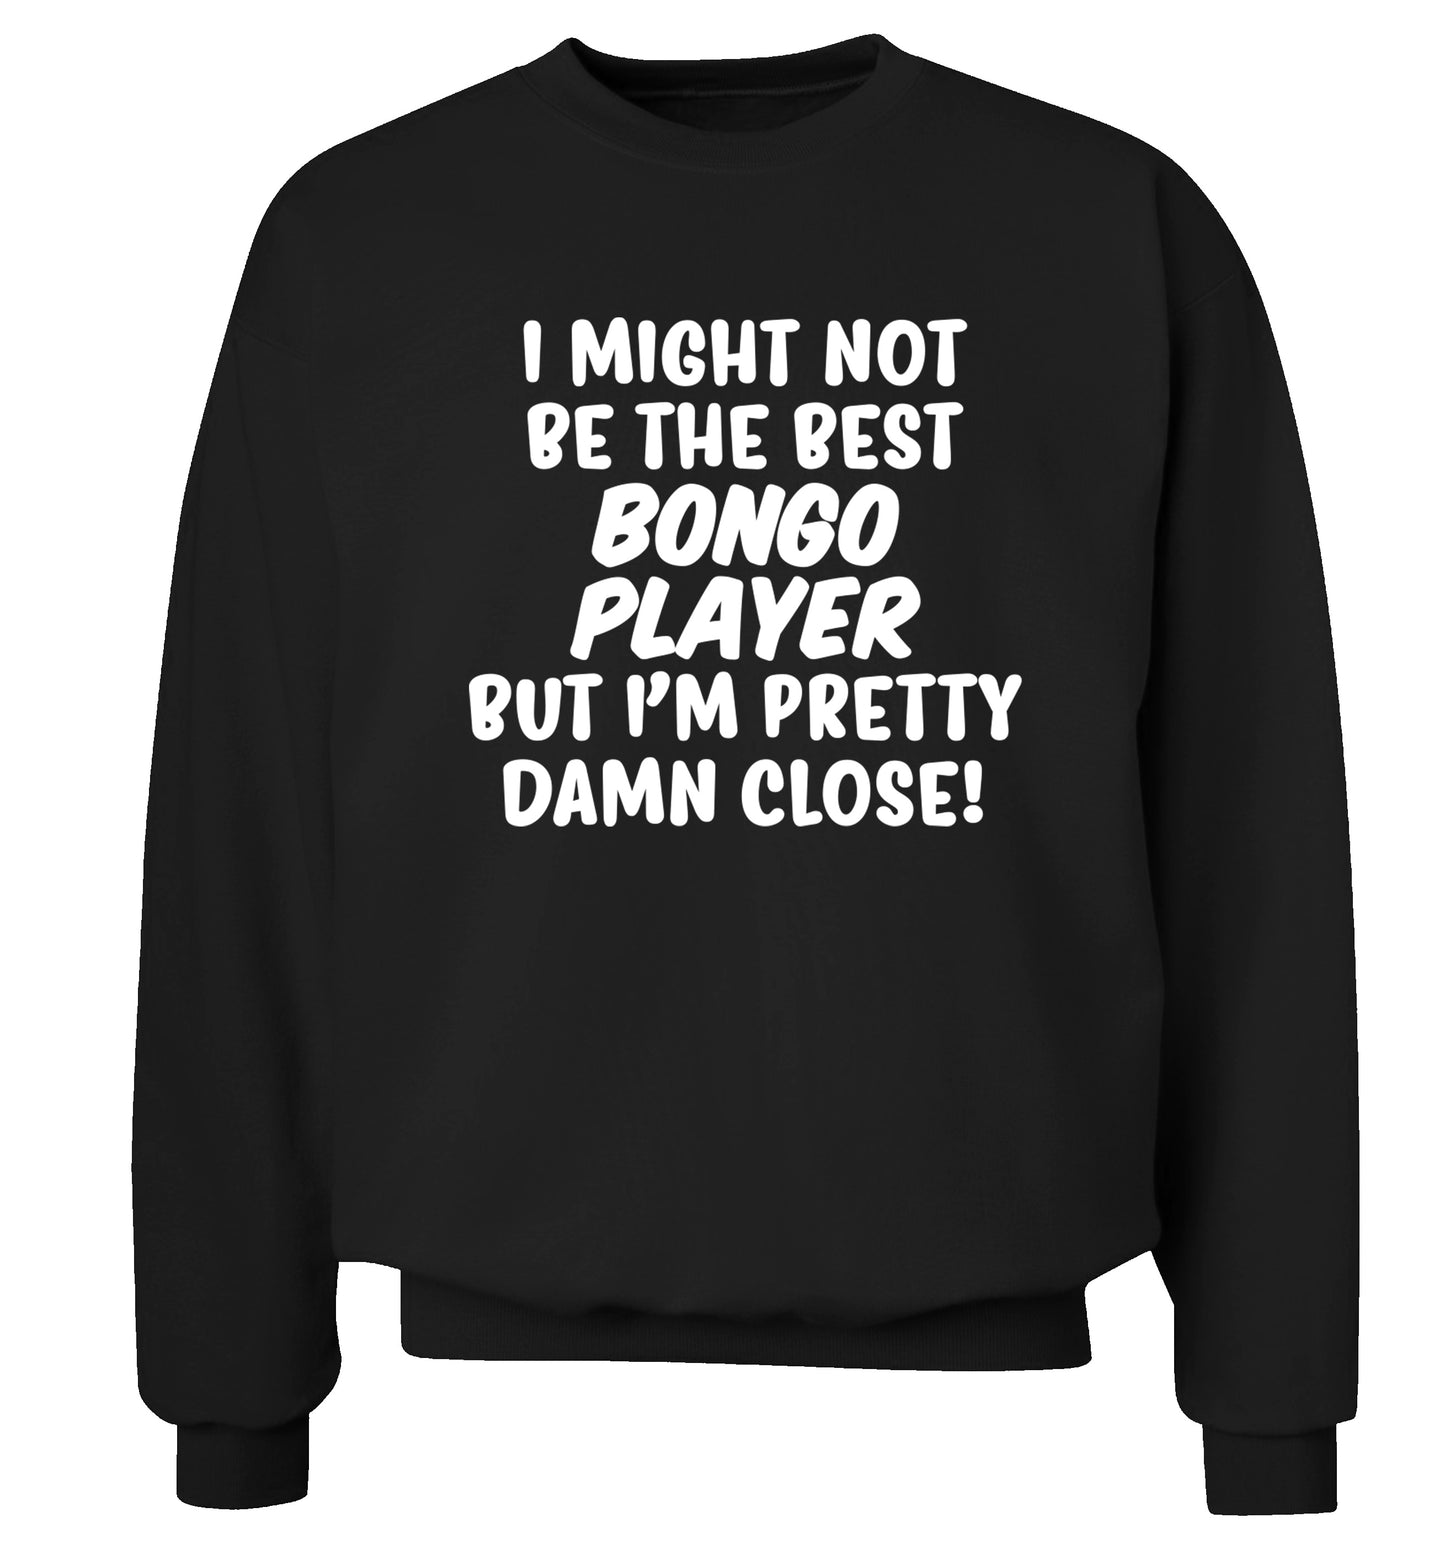 I might not be the best bongo player but I'm pretty close! Adult's unisexblack Sweater 2XL